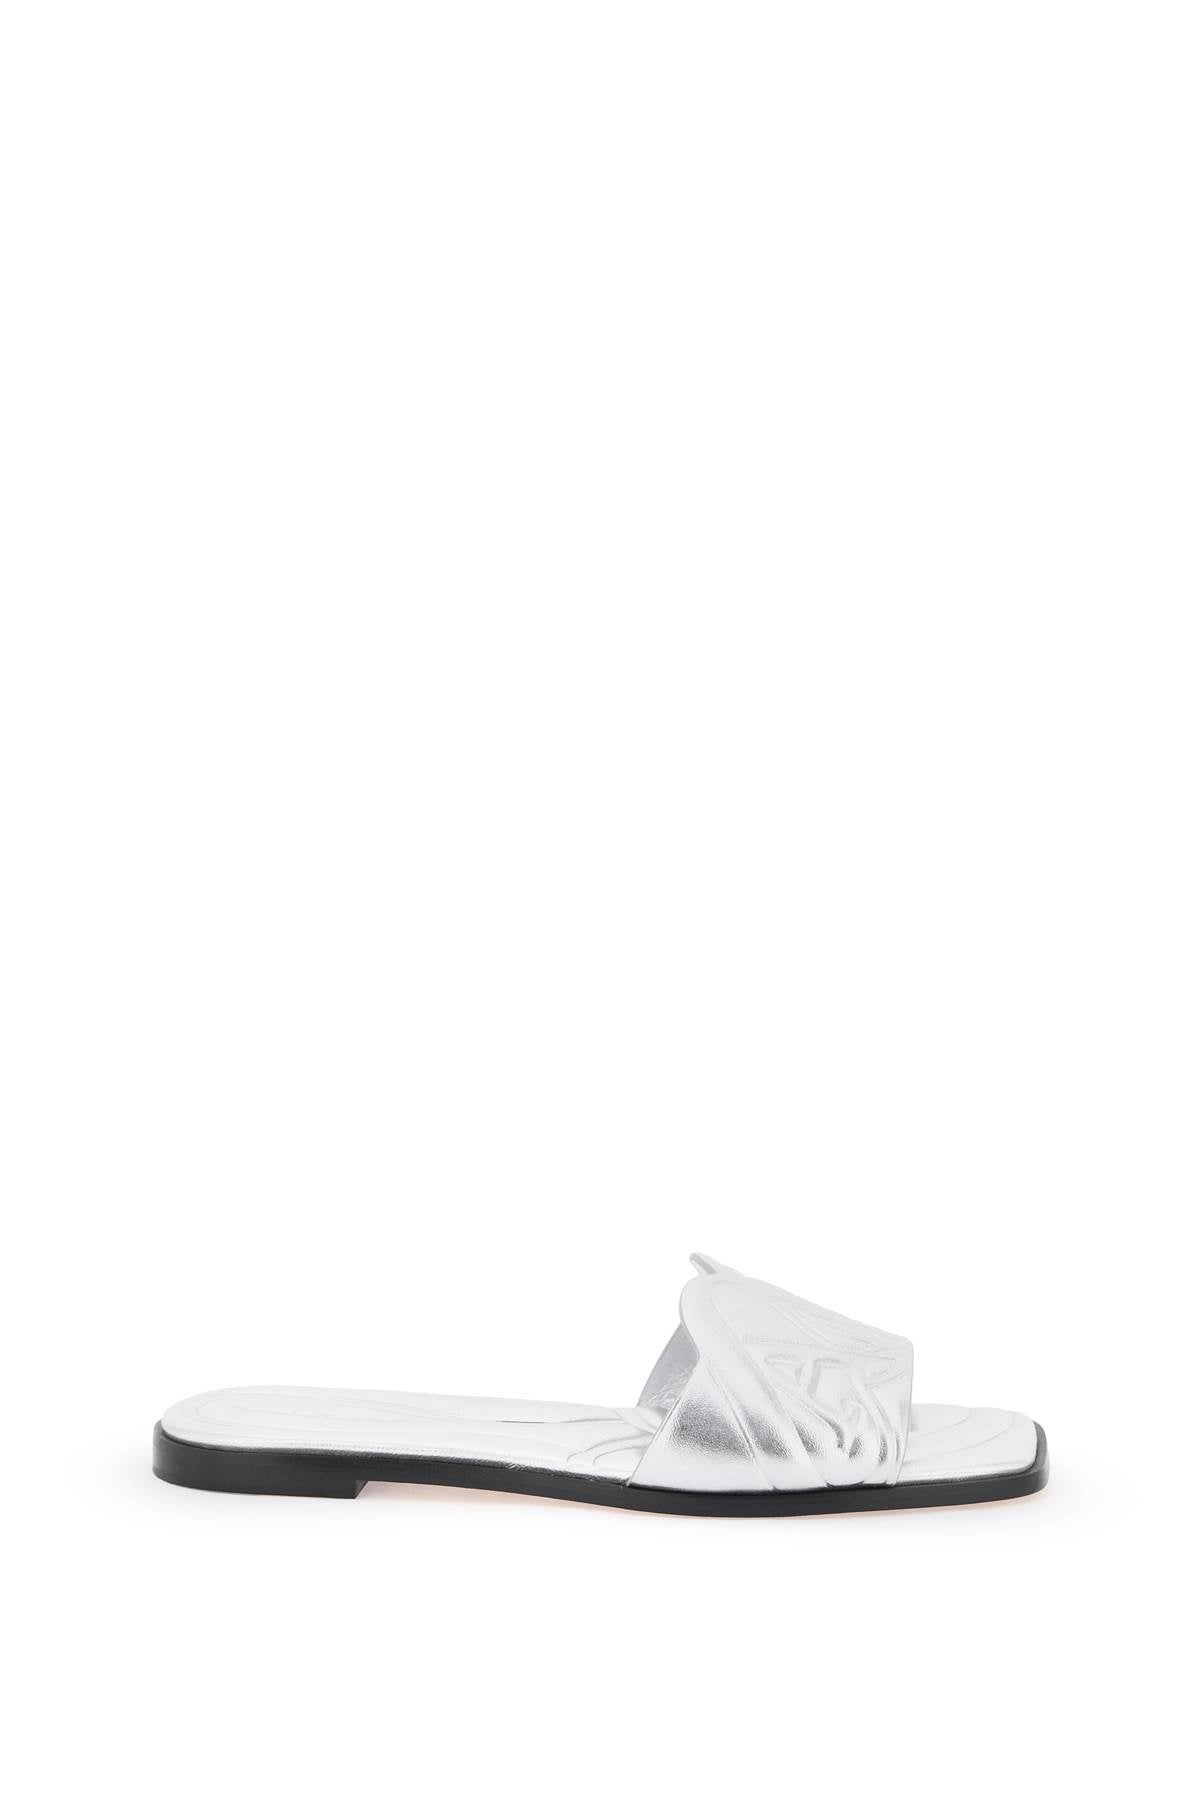 Alexander Mcqueen Laminated Leather Slides With Embossed Seal Logo Women - 1